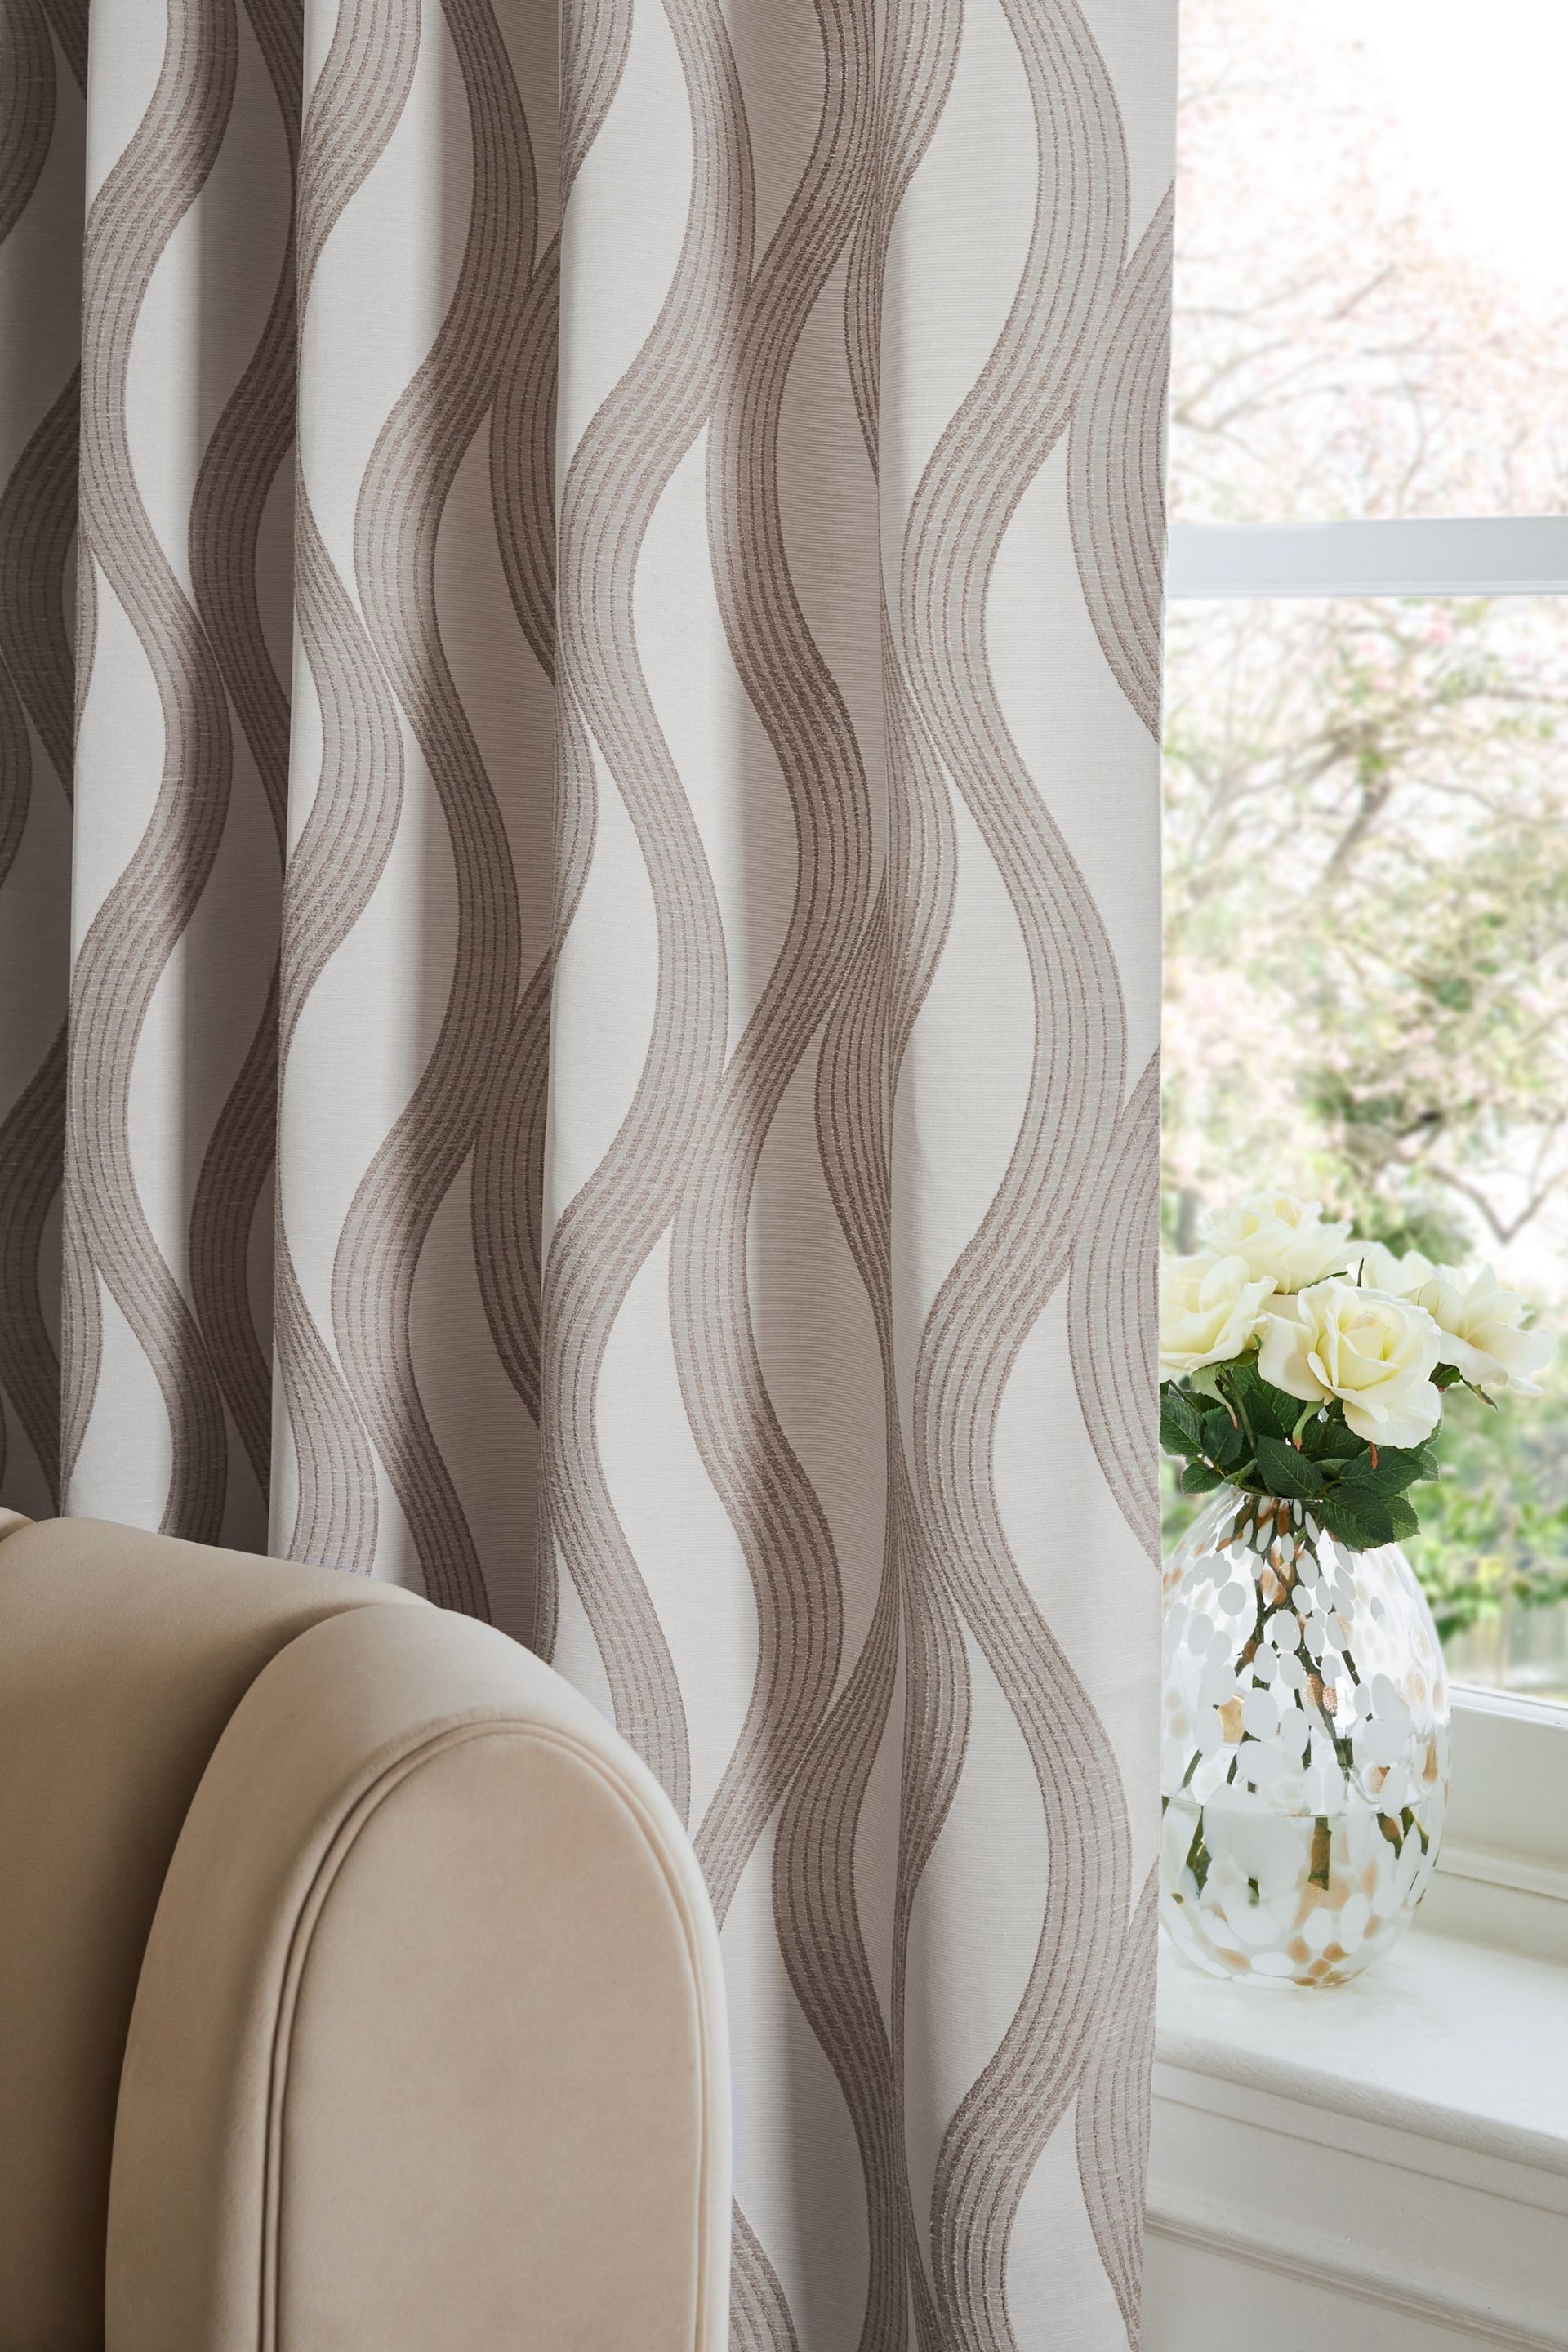 Natural Jacquard Swirl Eyelet Lined Curtains - Image 3 of 5